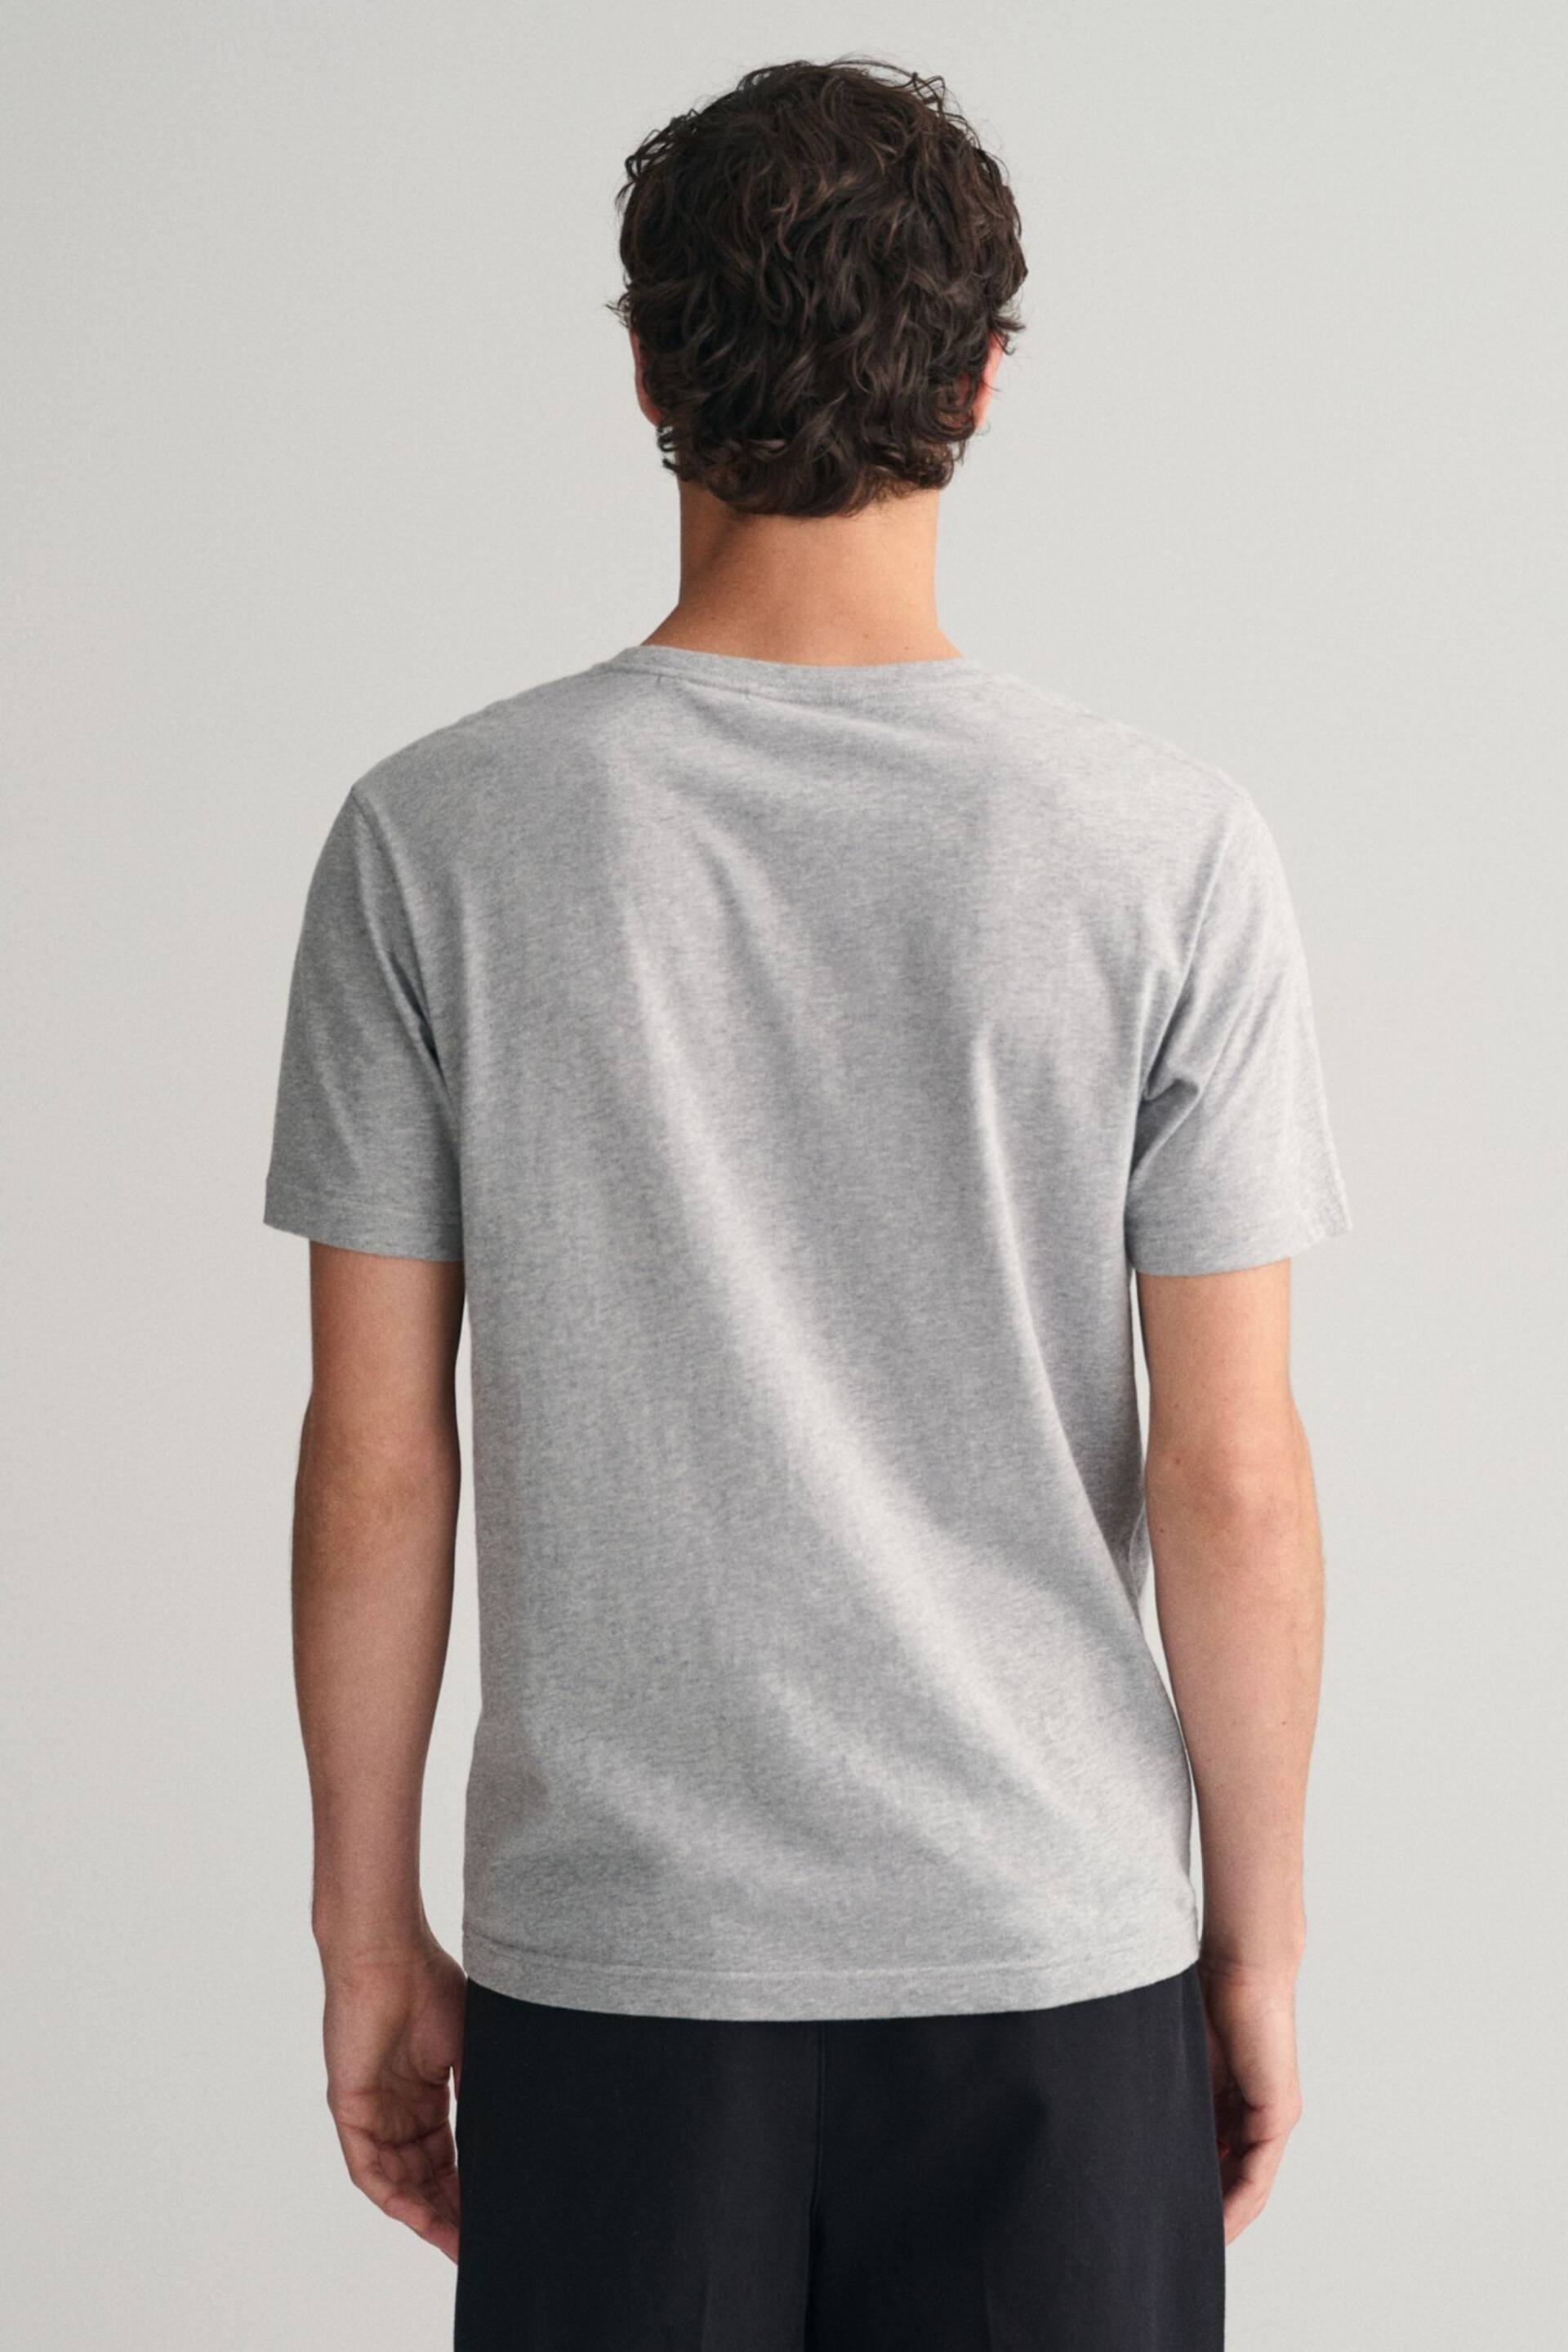 GANT Embroidered Archive Shield T-Shirt - Image 2 of 5